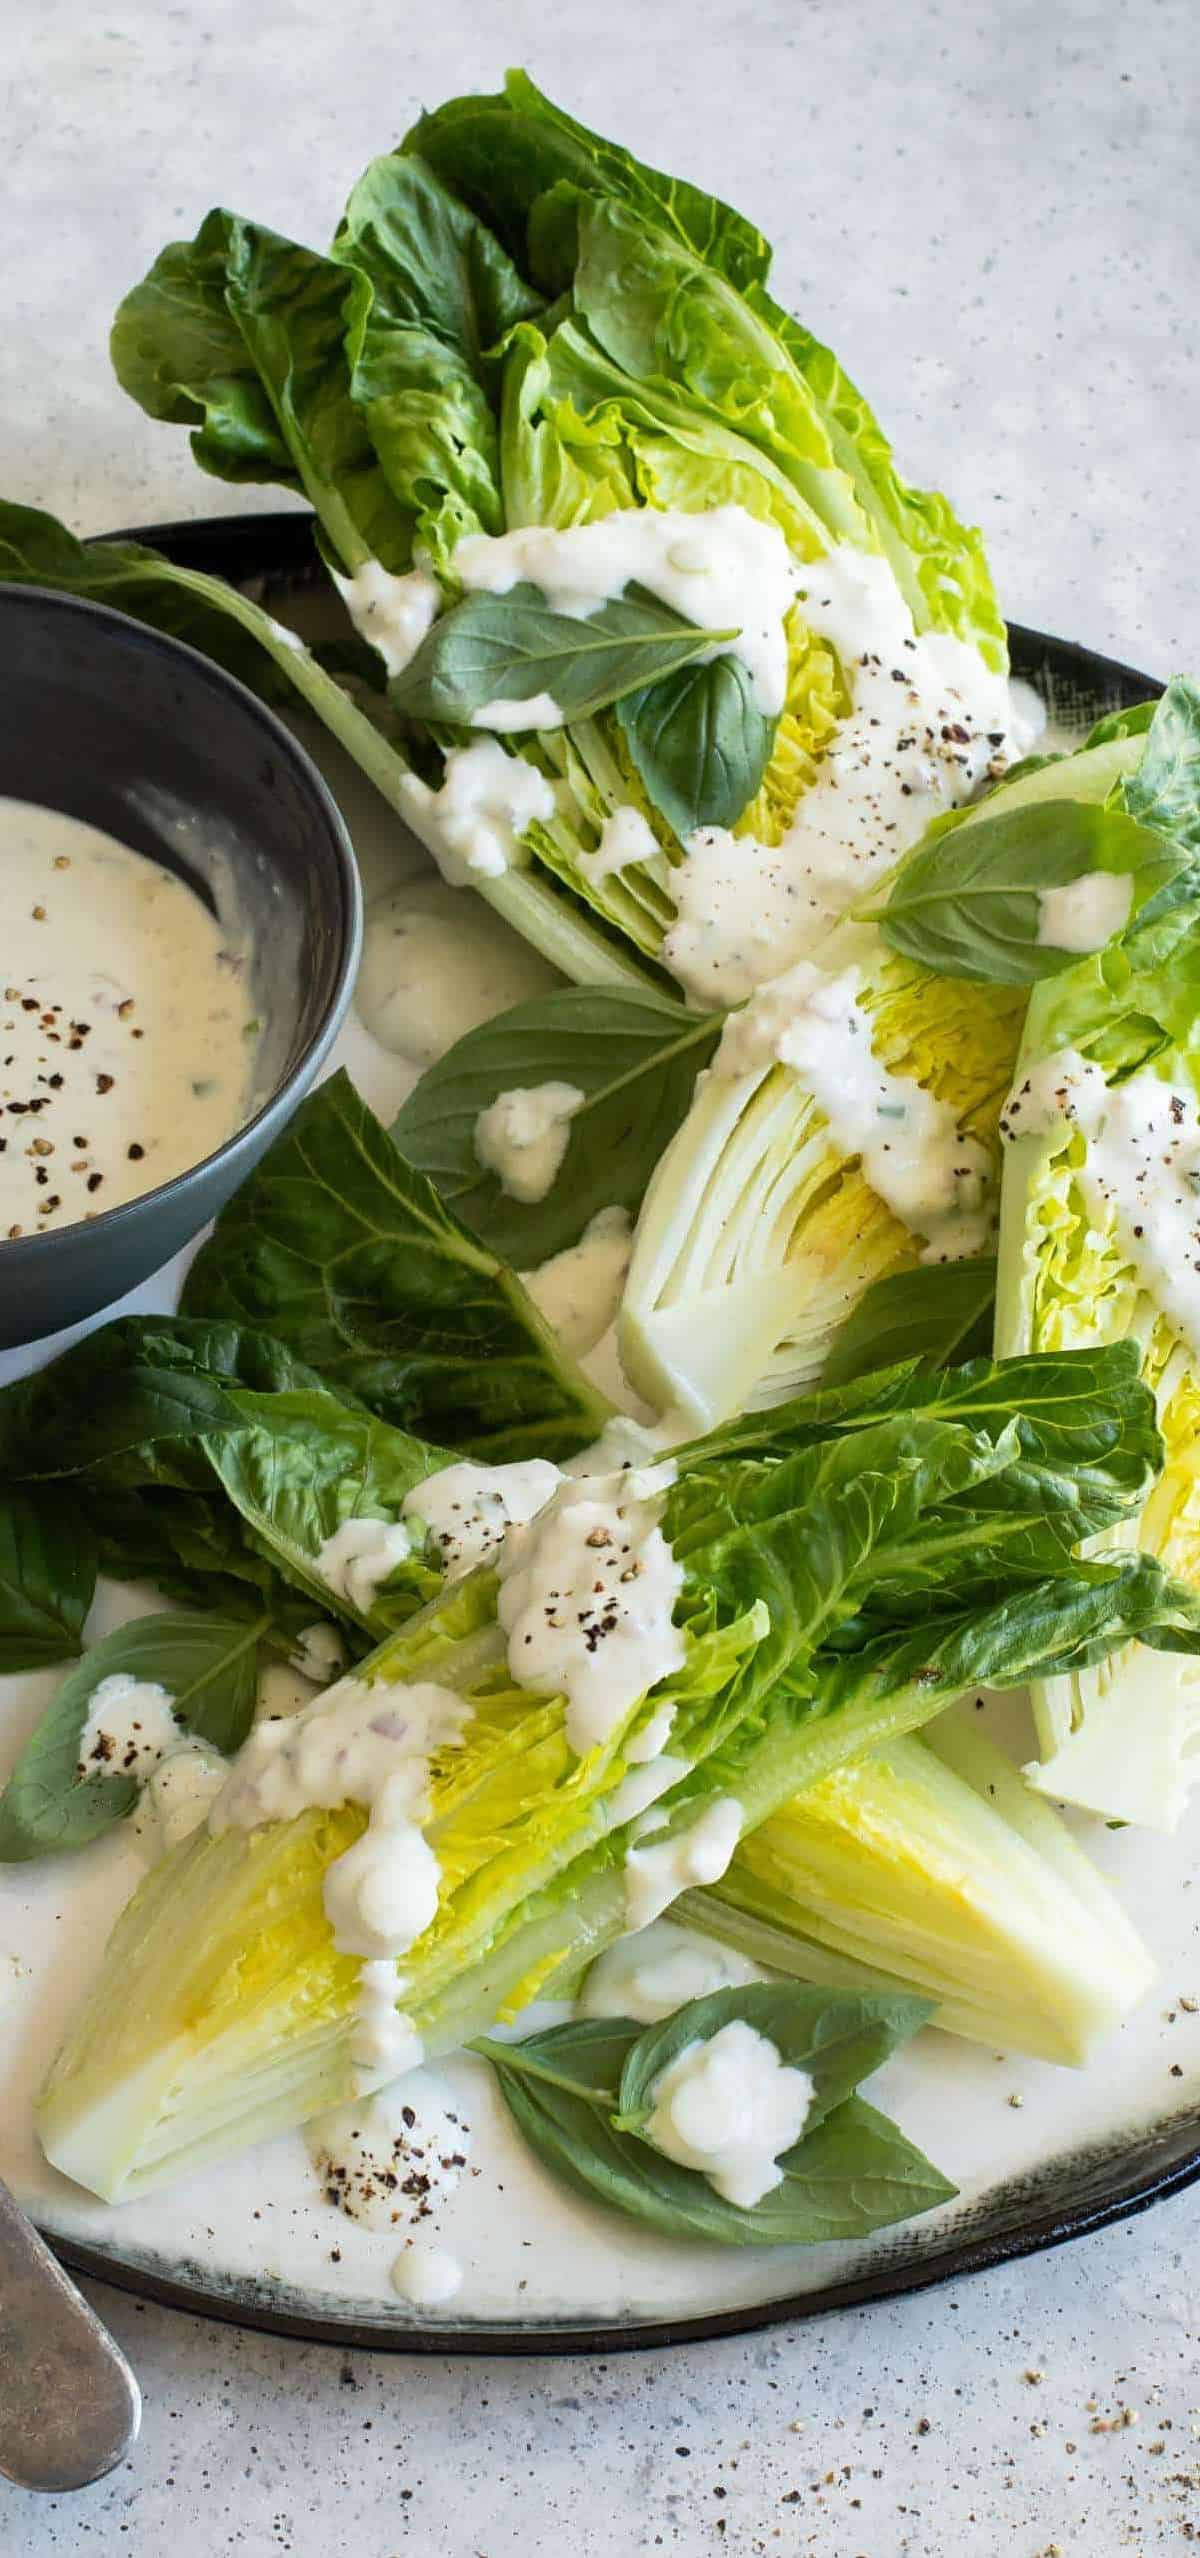  One taste and you'll fall in love with this dressing.